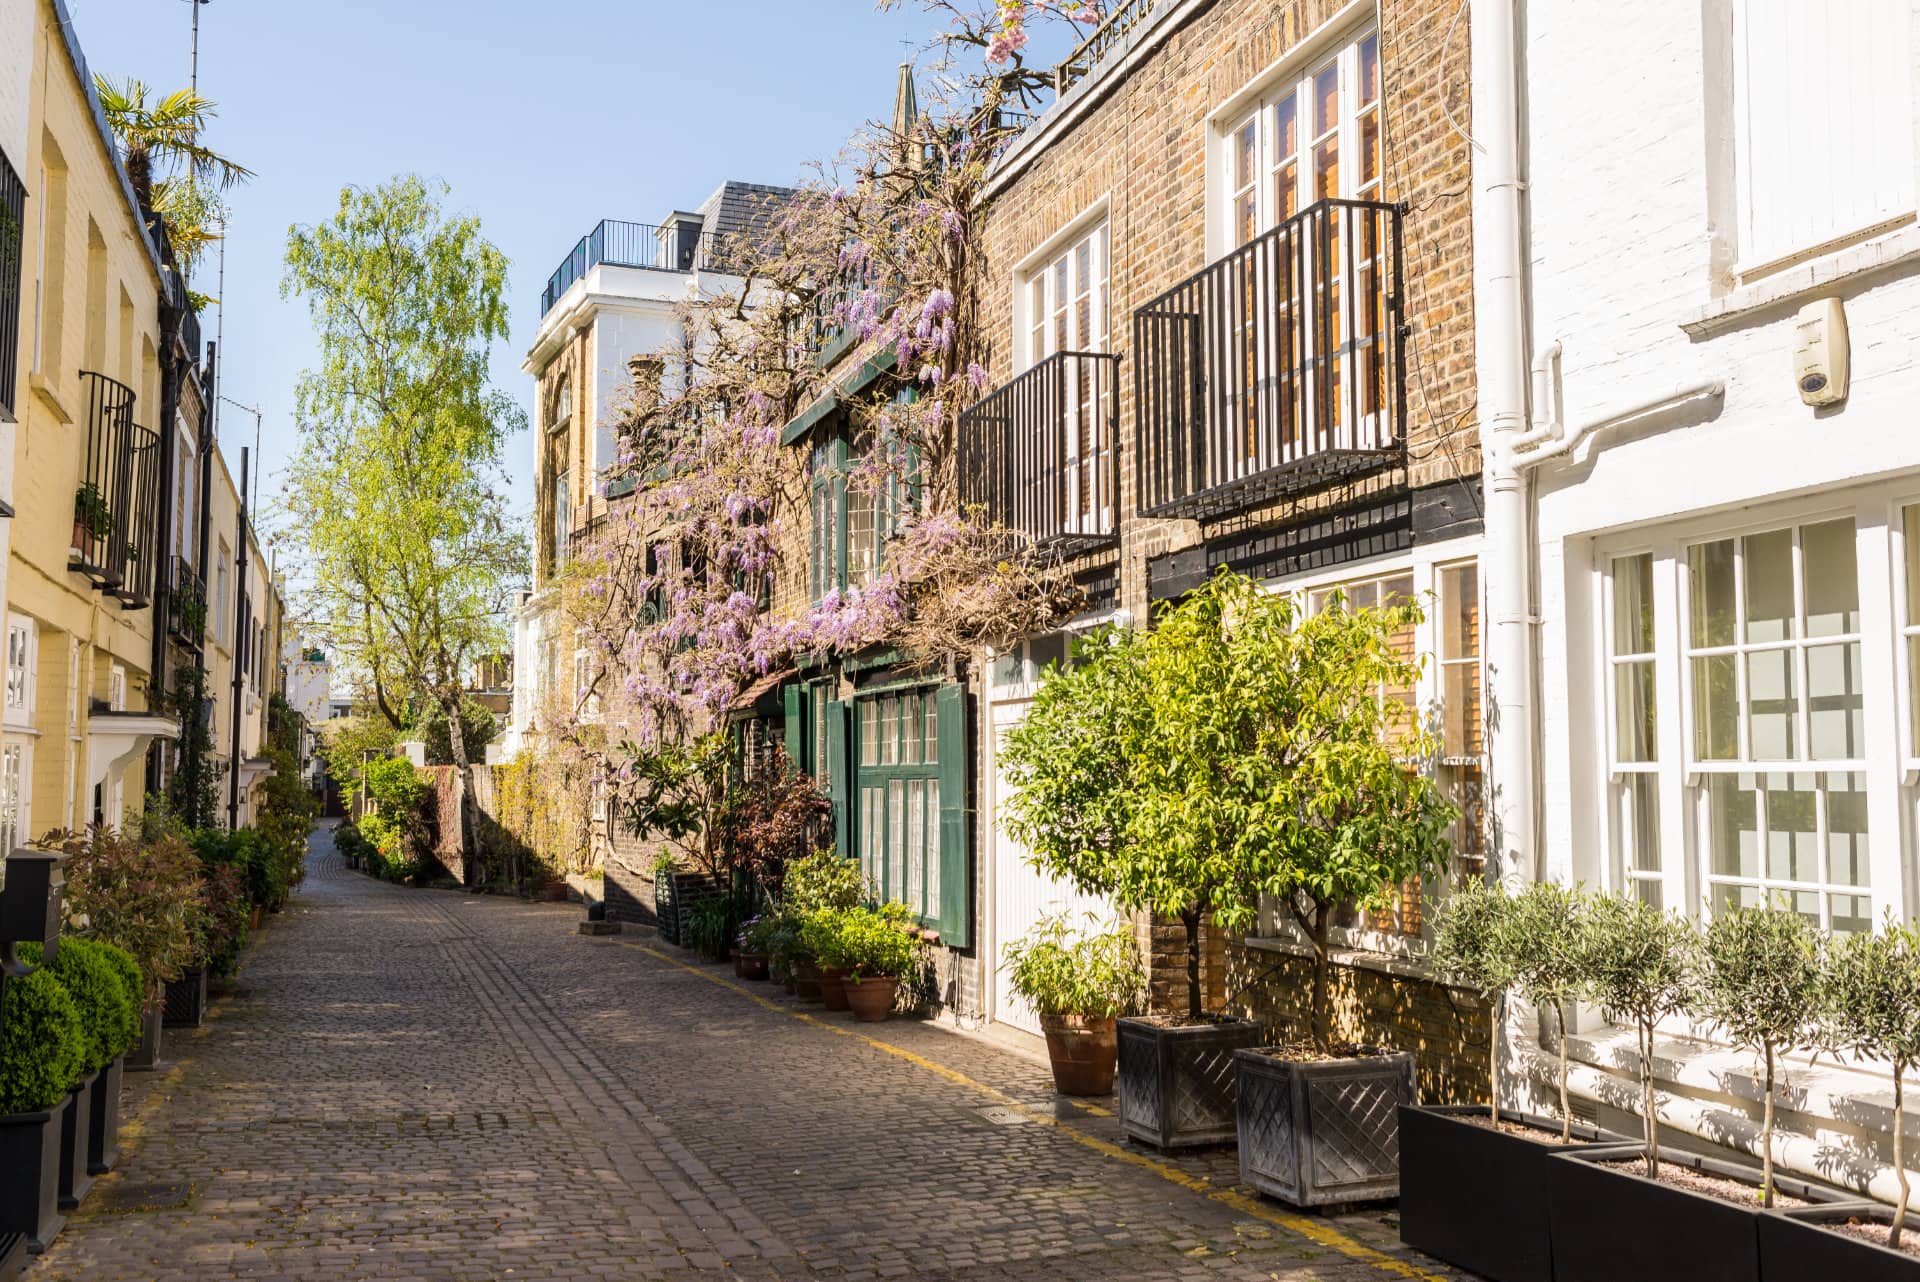 Elegant houses in a small exclusive mews with cobble stone stree